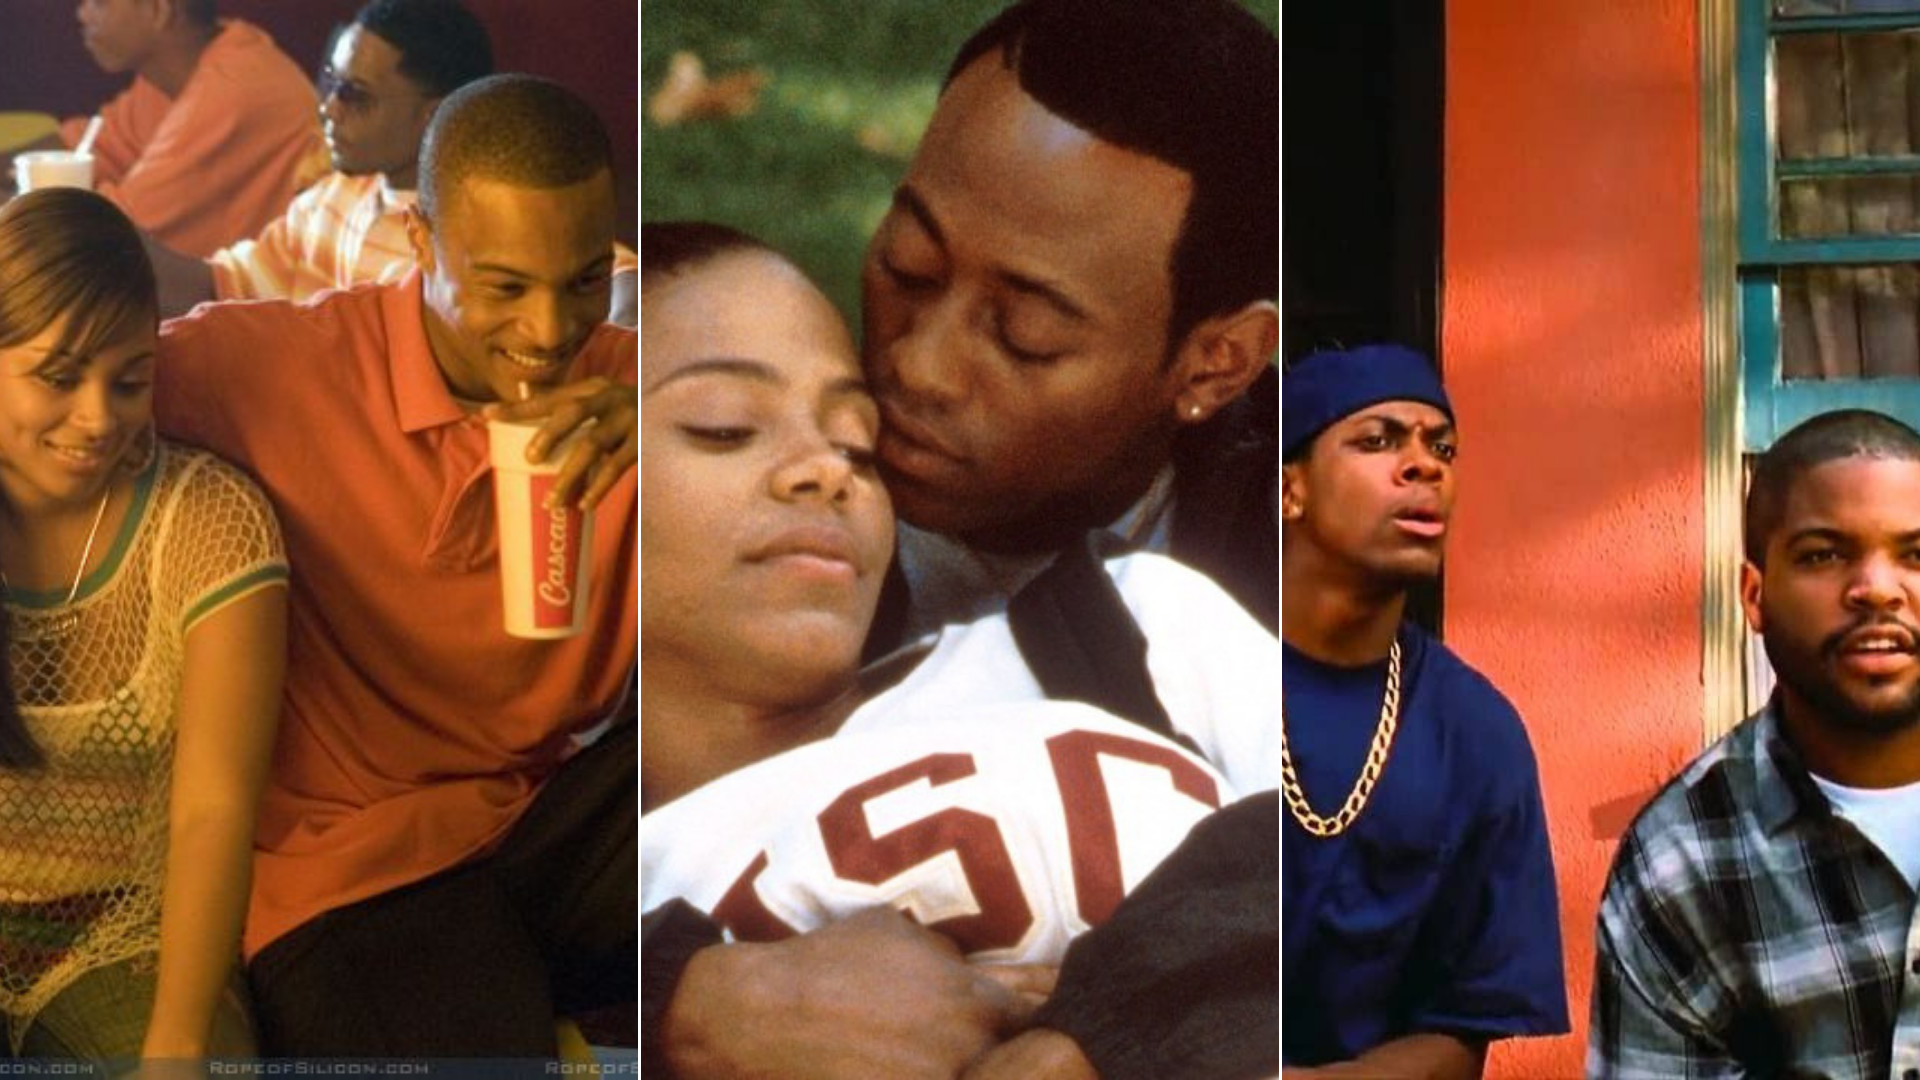 100 Movies You’ve Probably Watched More Than Once If You’re A Black Millennial